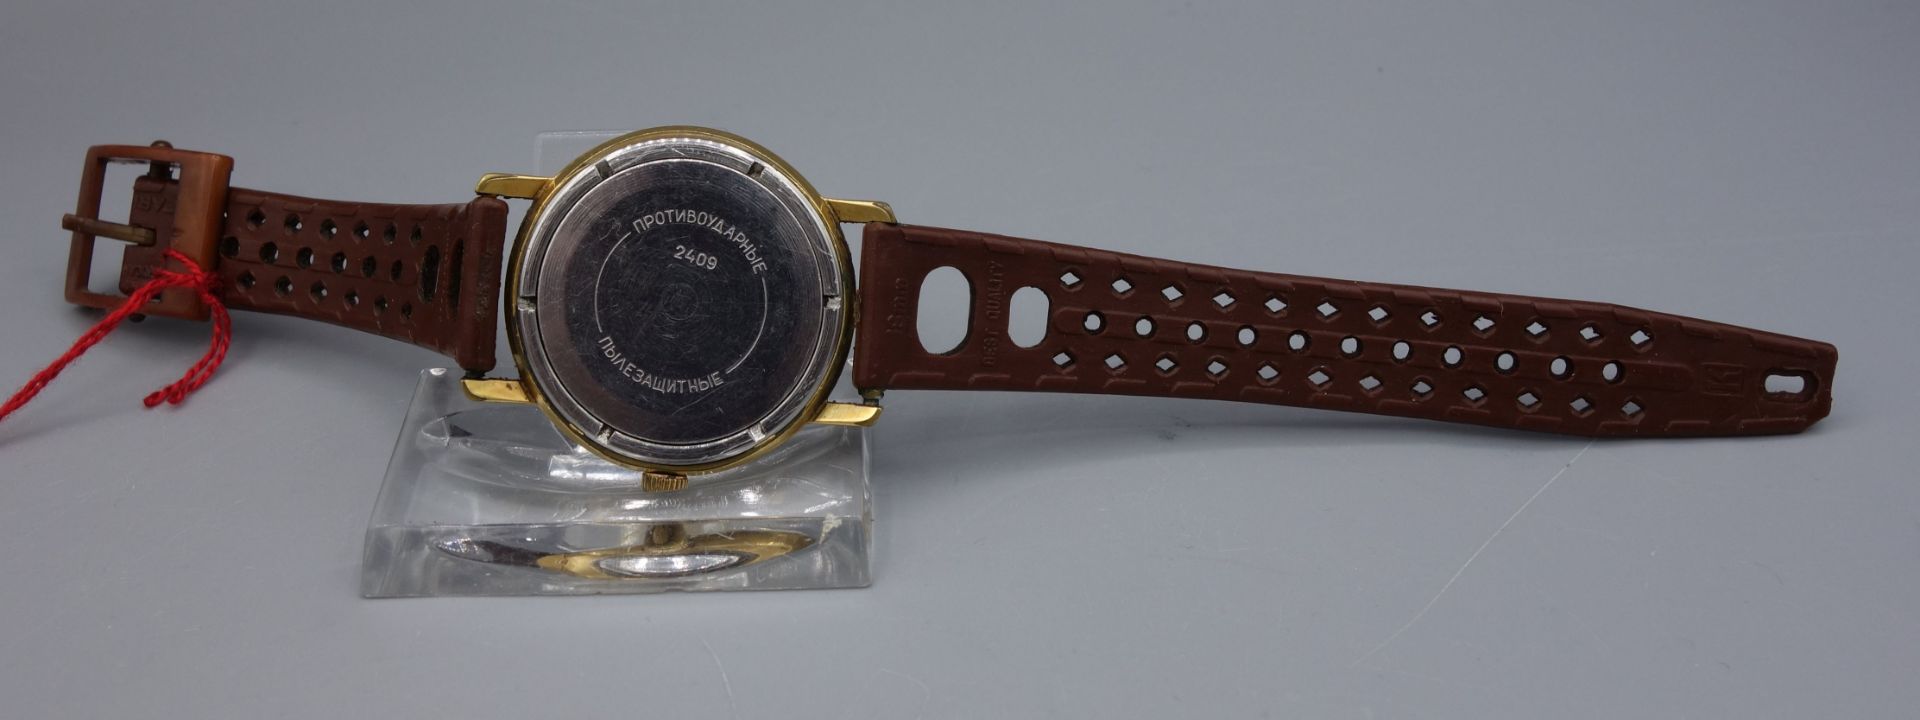 VINTAGE WATCH: WOSTOK  - Image 6 of 6